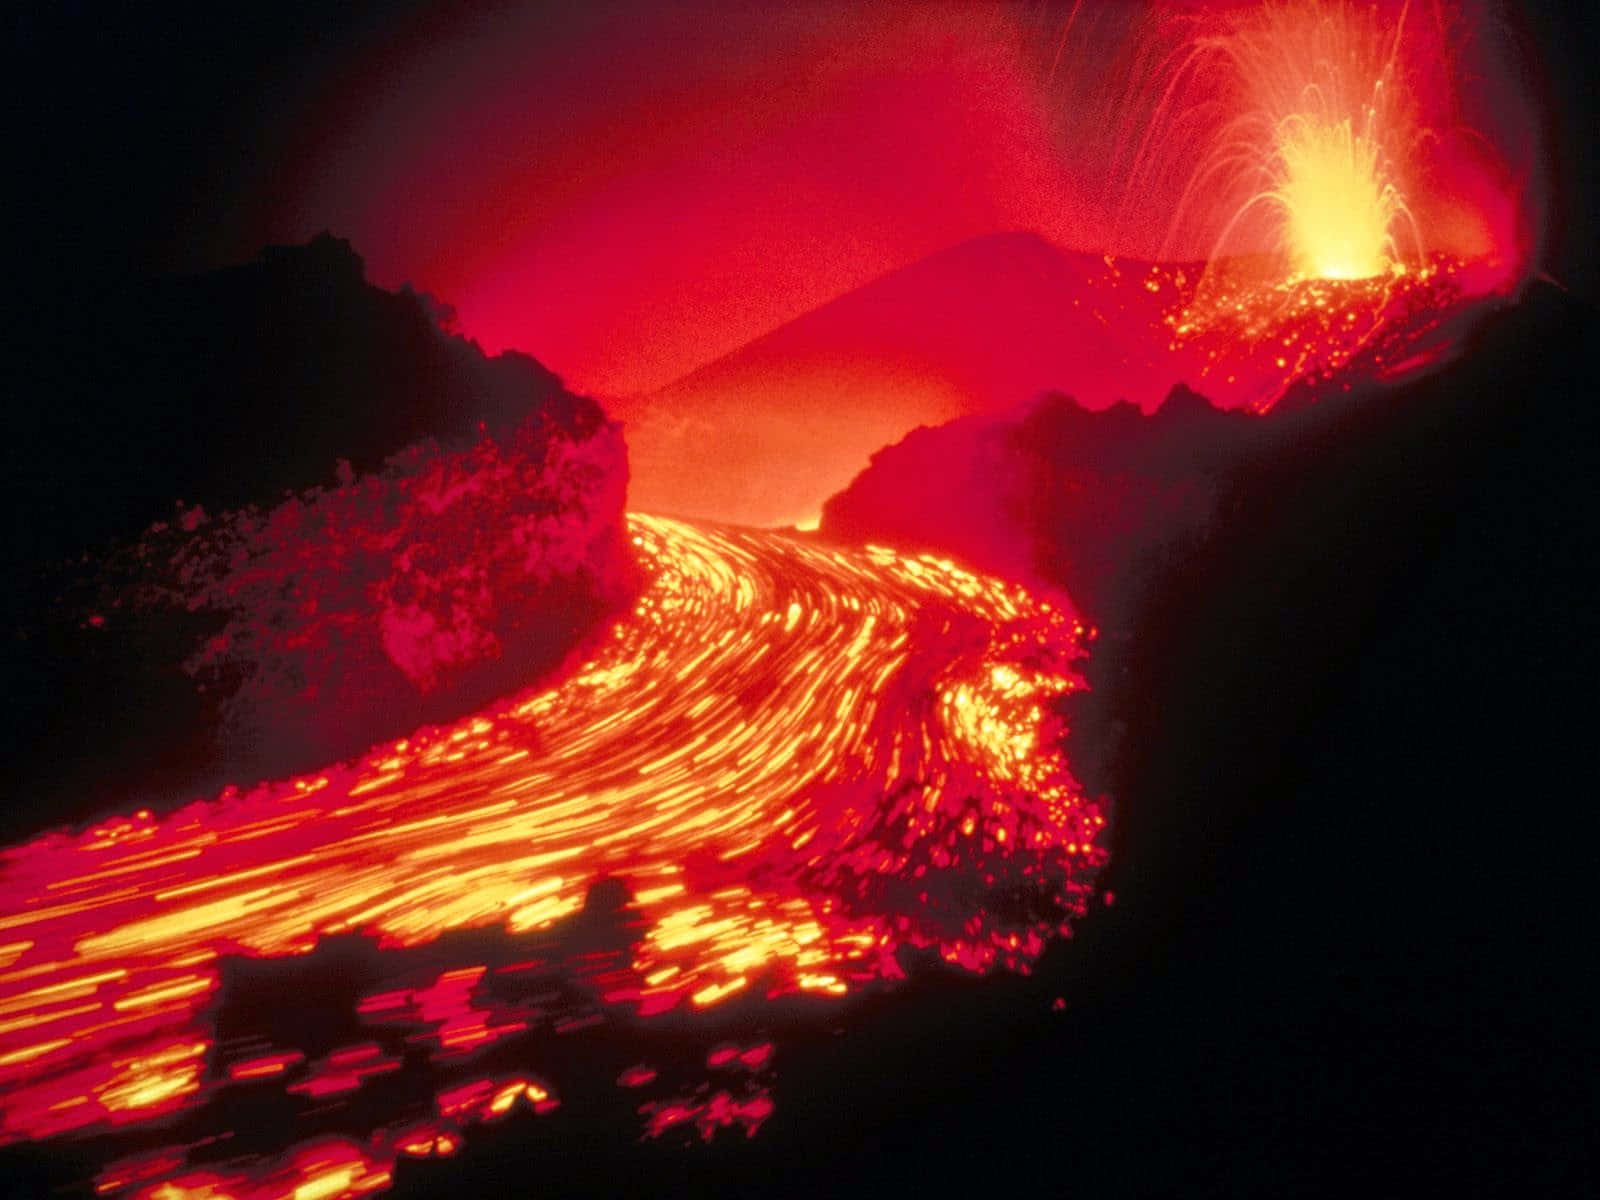 A Lava Flow With Red And Orange Light